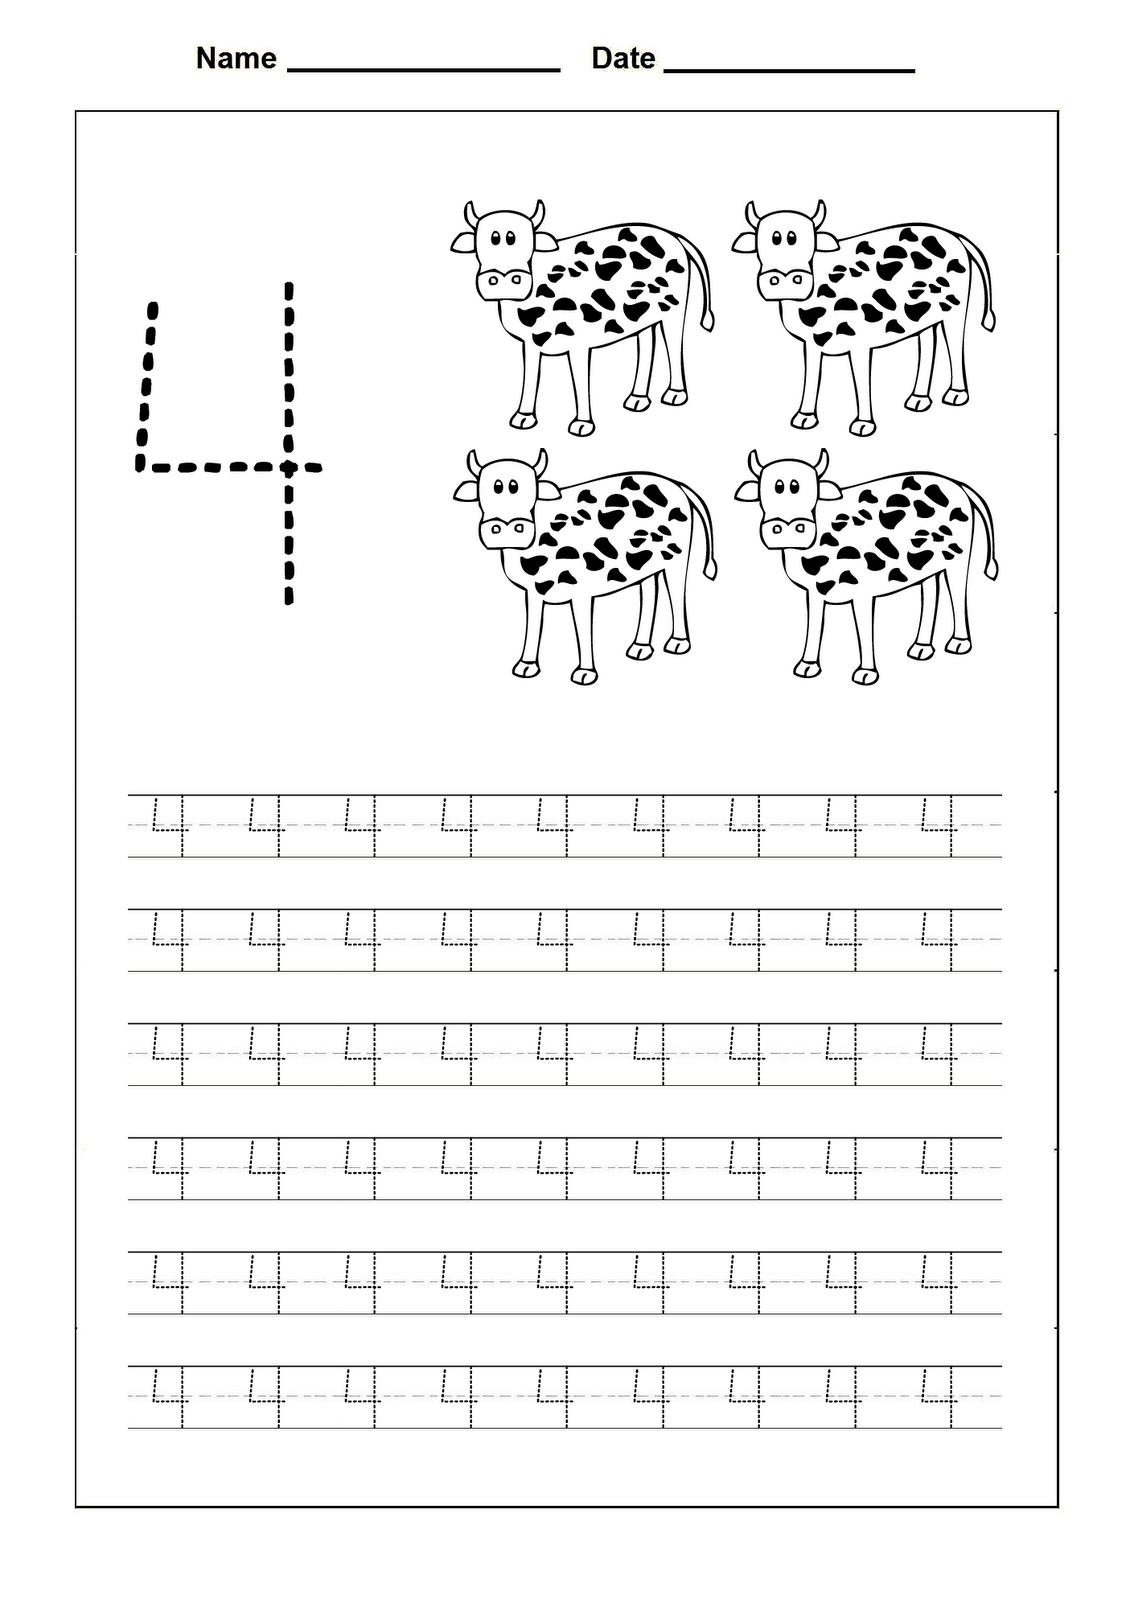 Number 4 Worksheets To Print  Activity Shelter Pertaining To Number 4 Worksheets